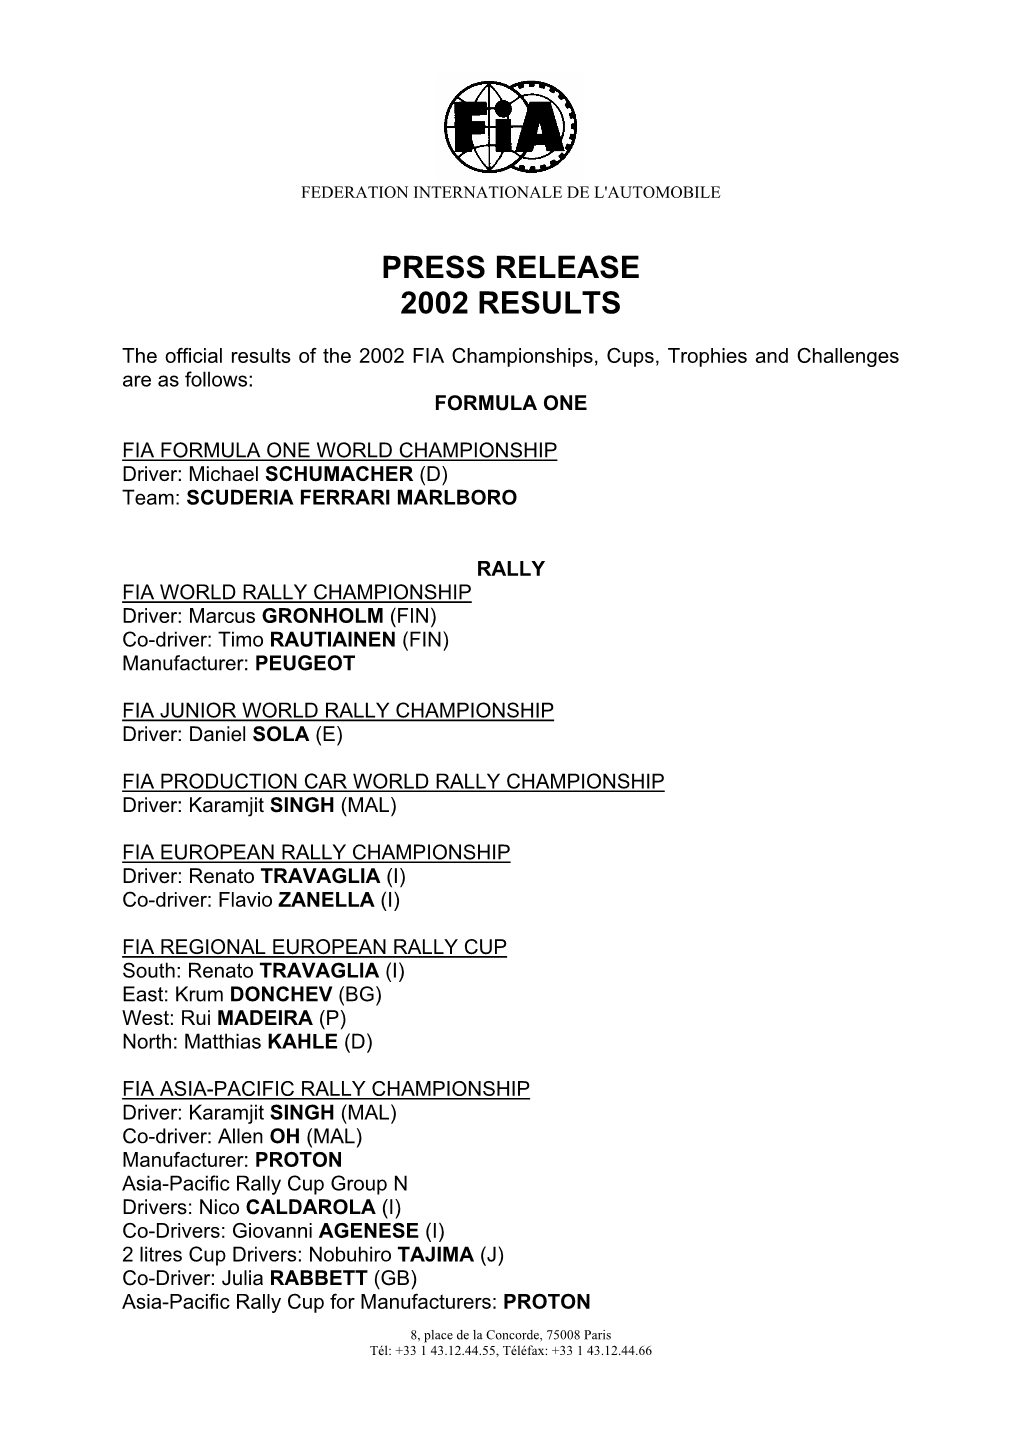 Press Release 2002 Results